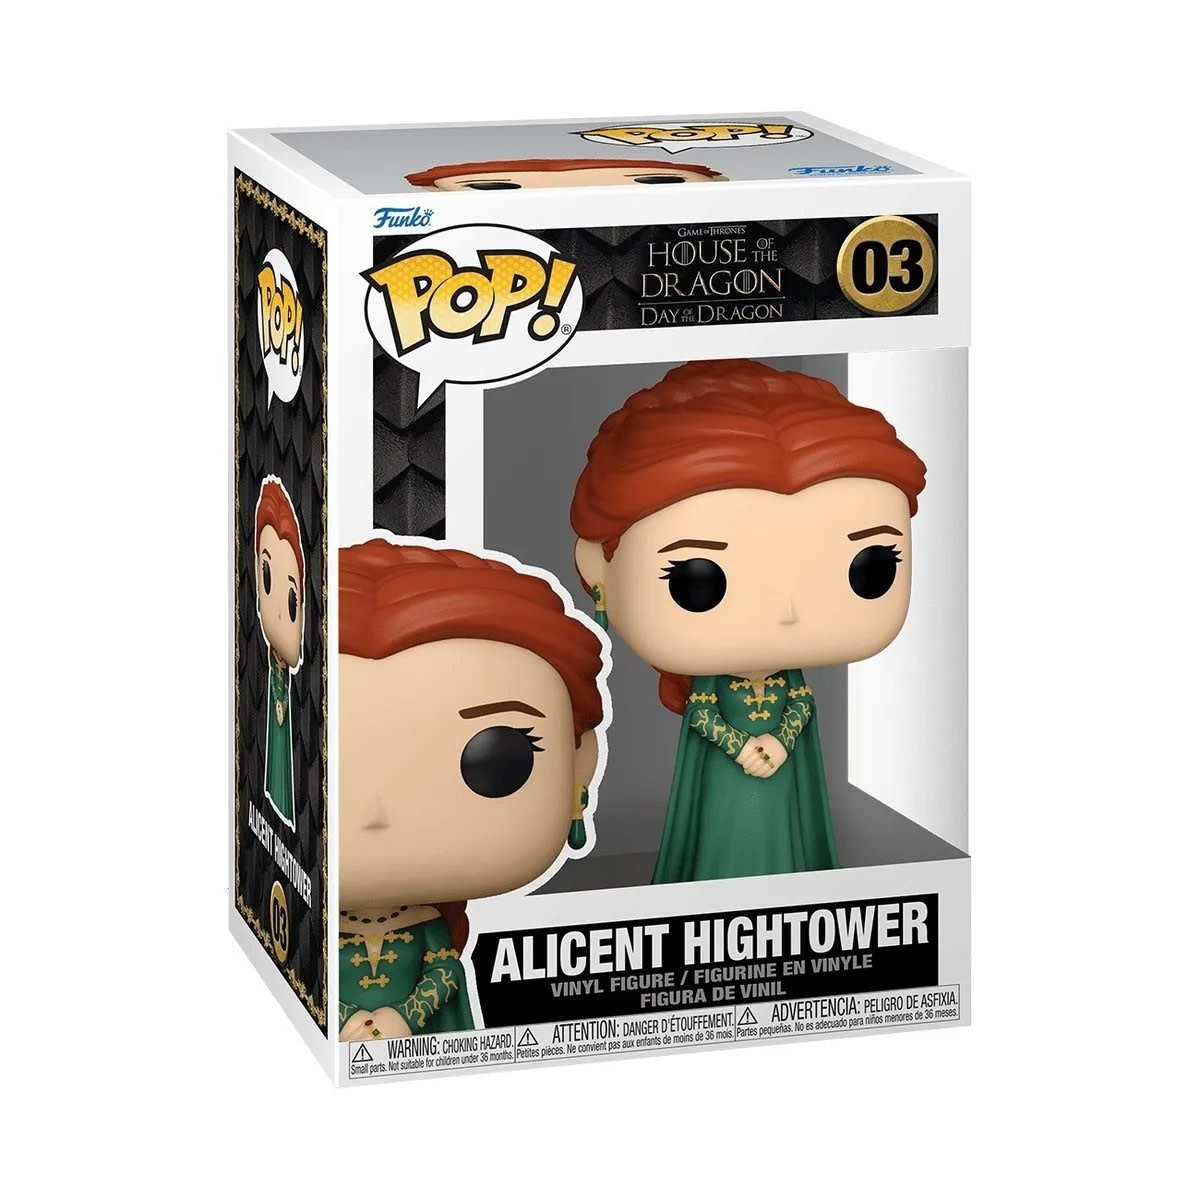 POP! Alicent Hightower #03 - House of the Dragon